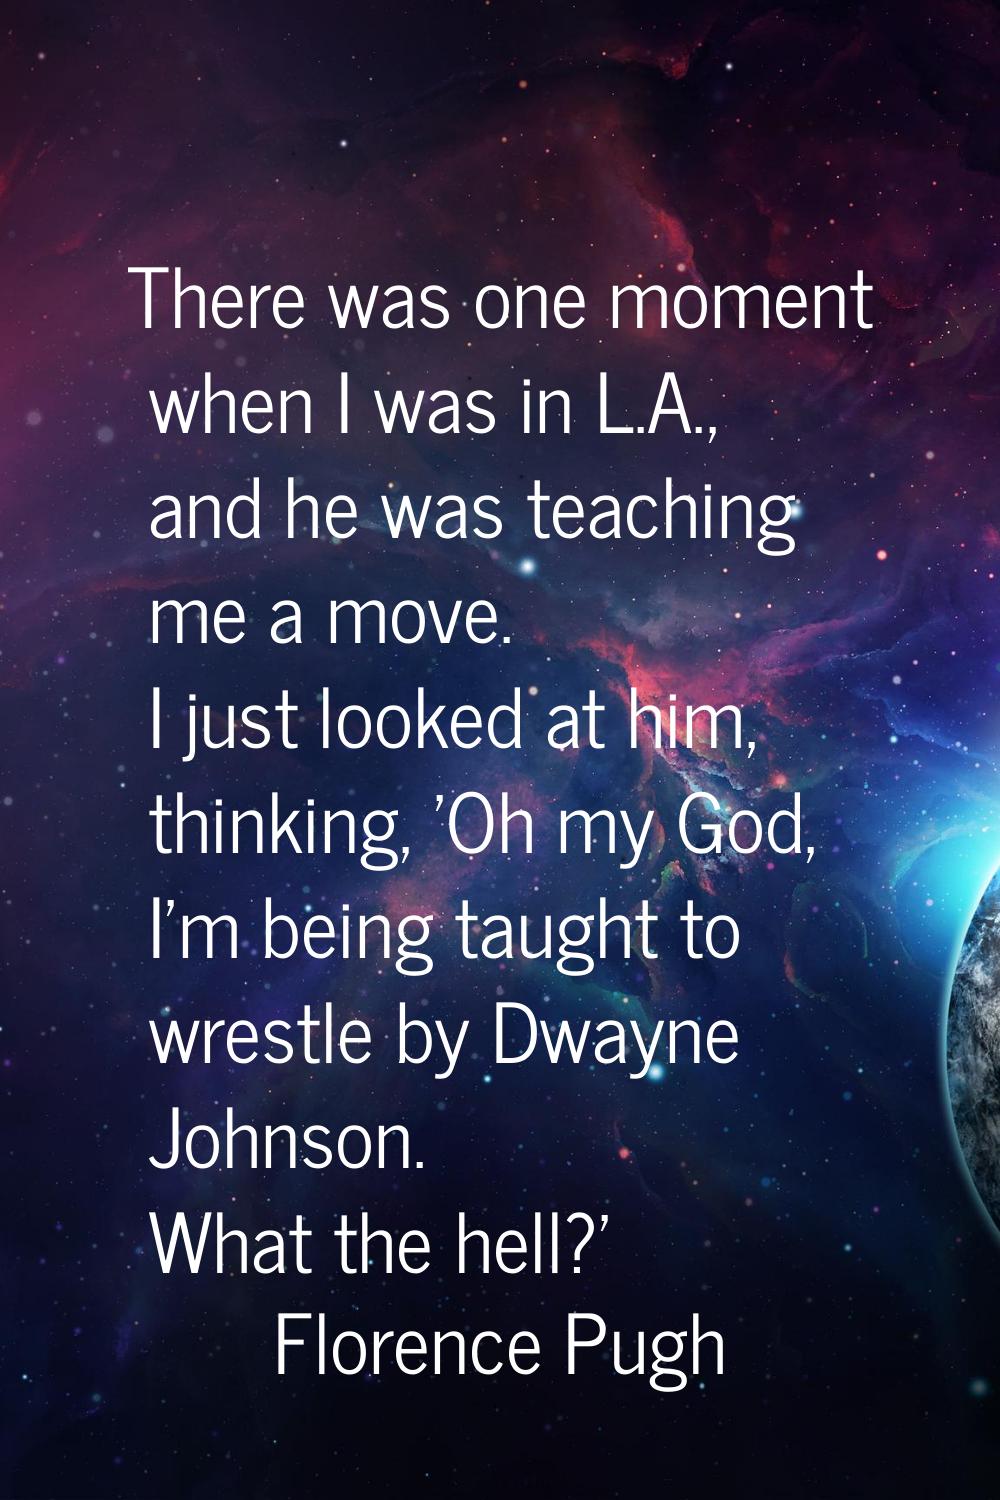 There was one moment when I was in L.A., and he was teaching me a move. I just looked at him, think